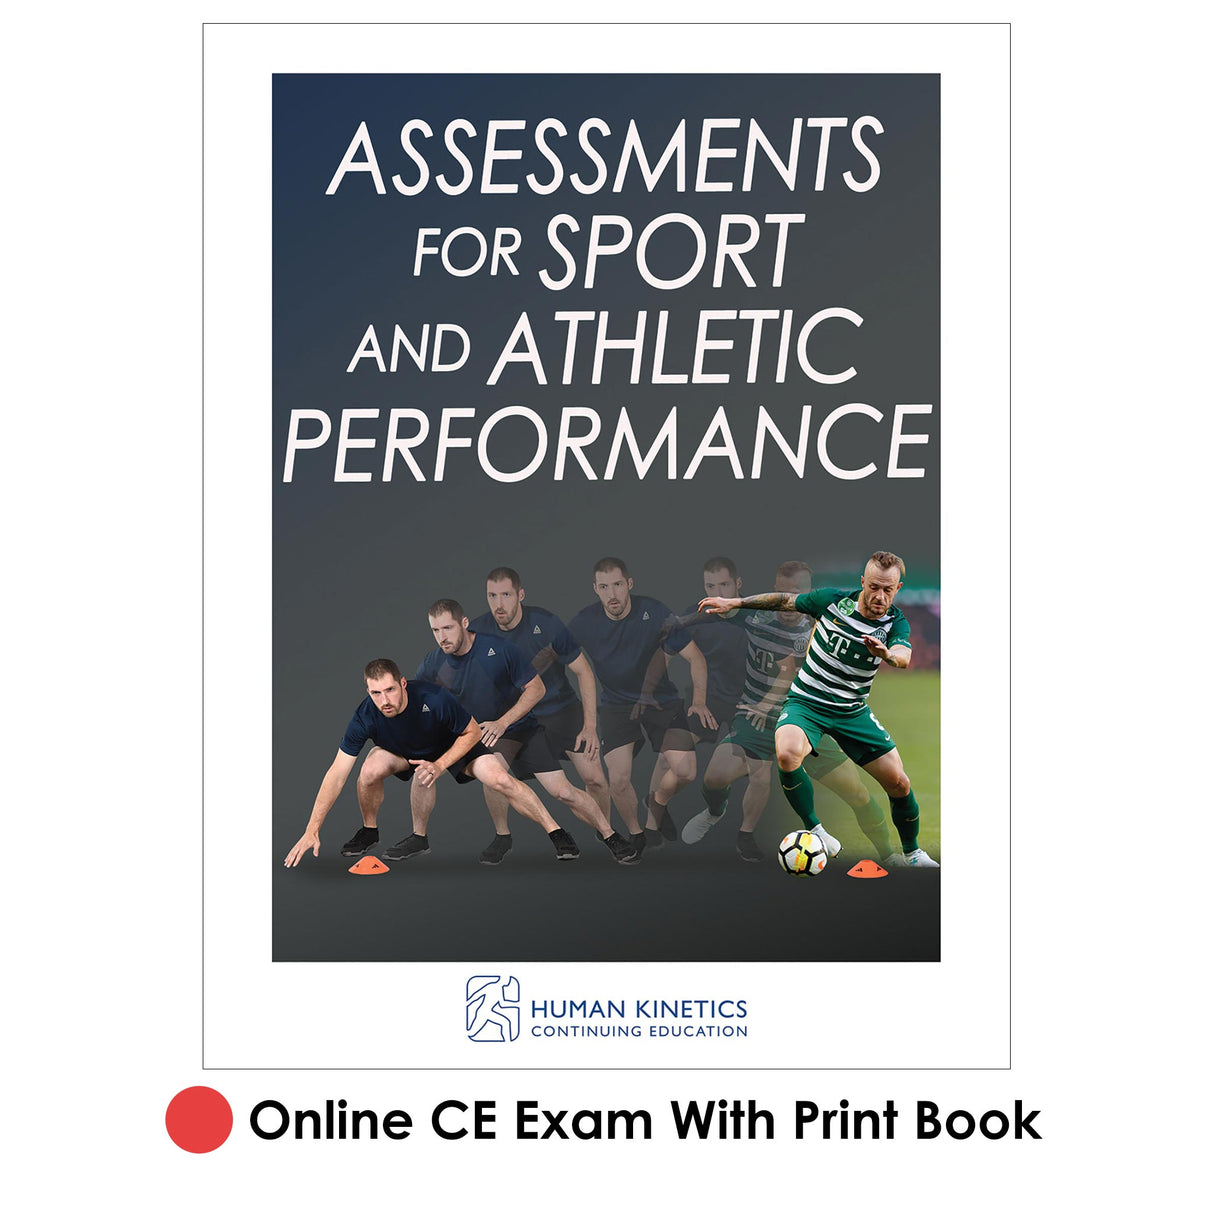 Assessments for Sport and Athletic Performance Online CE Exam With Print Book